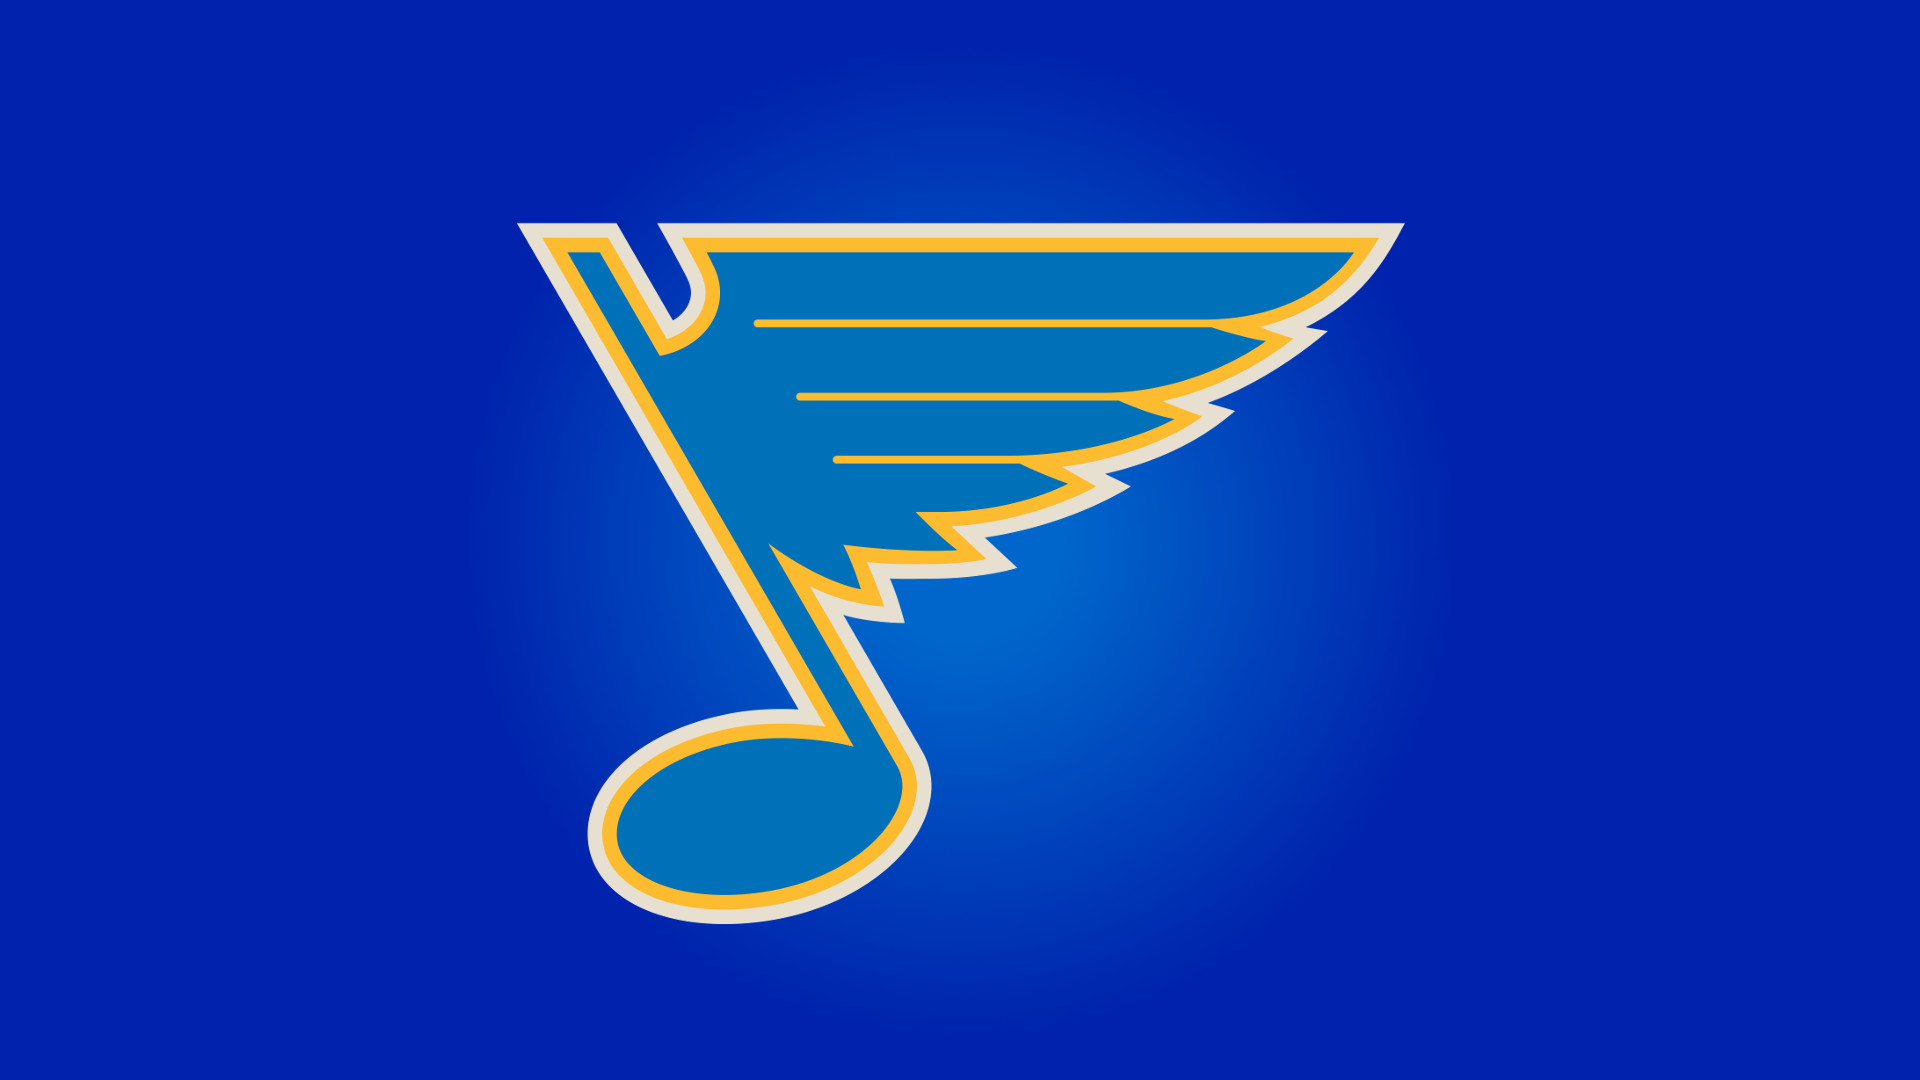 Wallpaper wallpaper, sport, logo, NHL, hockey, St. Louis Blues for mobile  and desktop, section спорт, resolution 3840x2400 - download